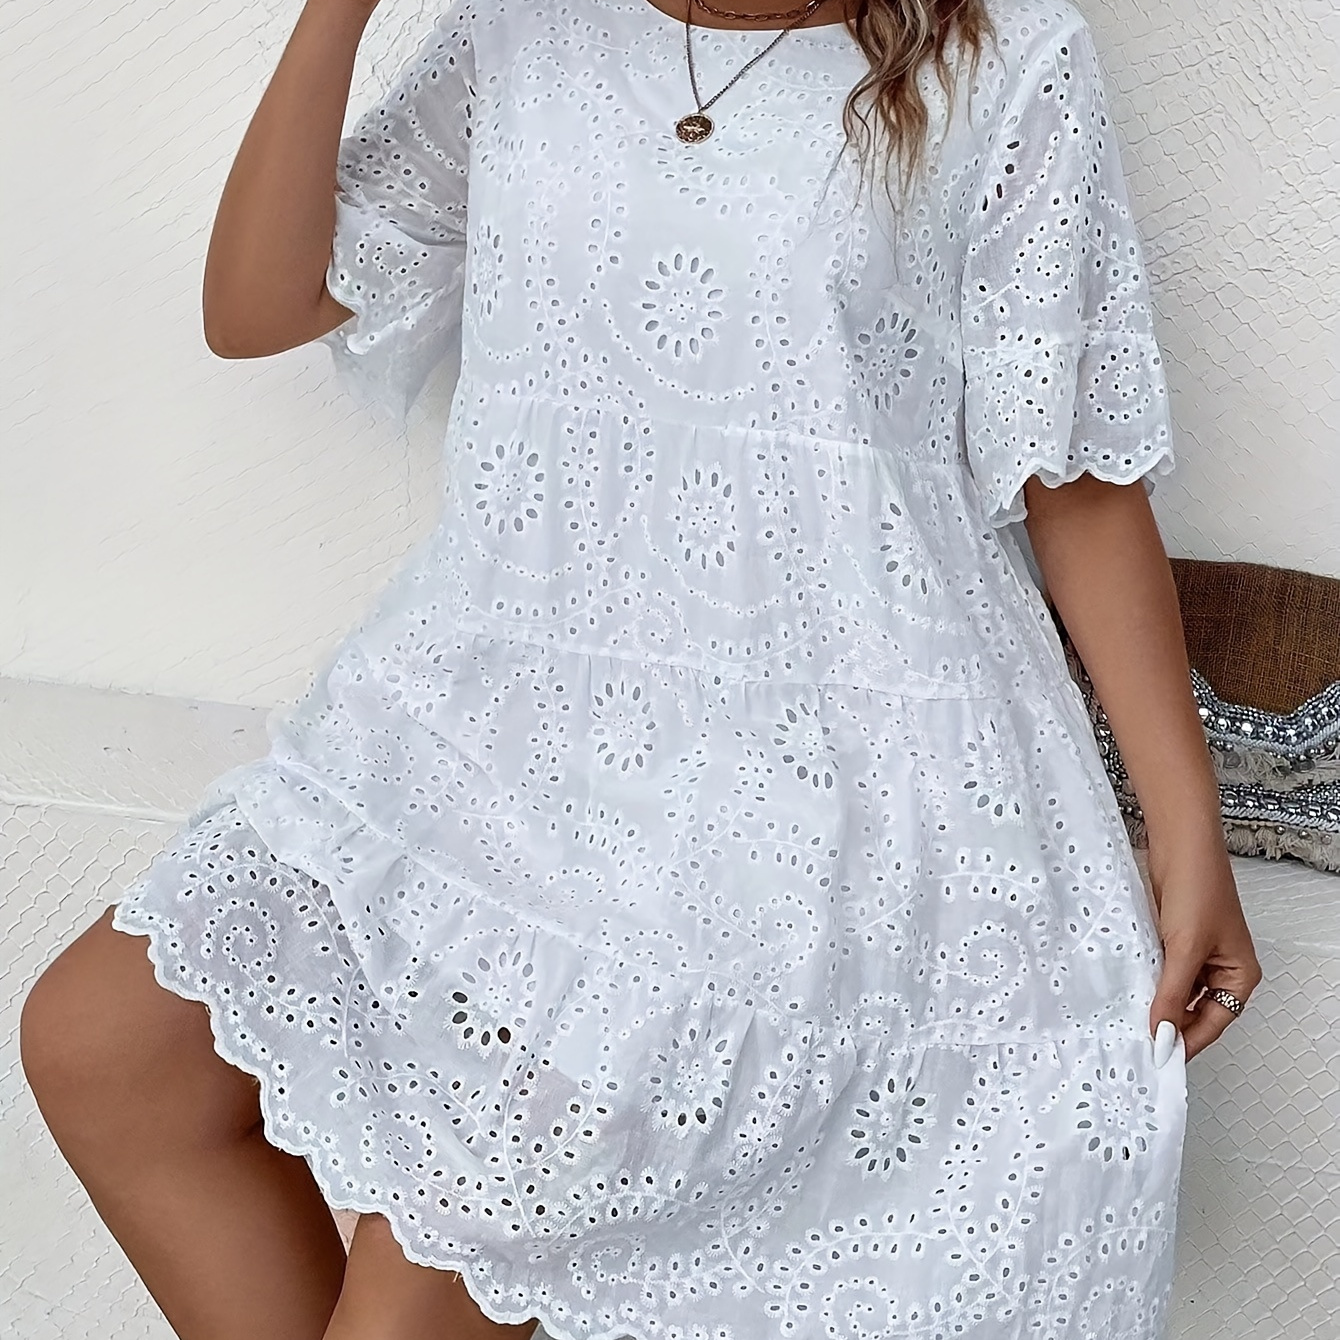 

Plus Size Eyelet Embroidery Solid Dress, Elegant Scallop Trim Cut Out Short Sleeve Crew Neck Dress, Women's Plus Size clothing